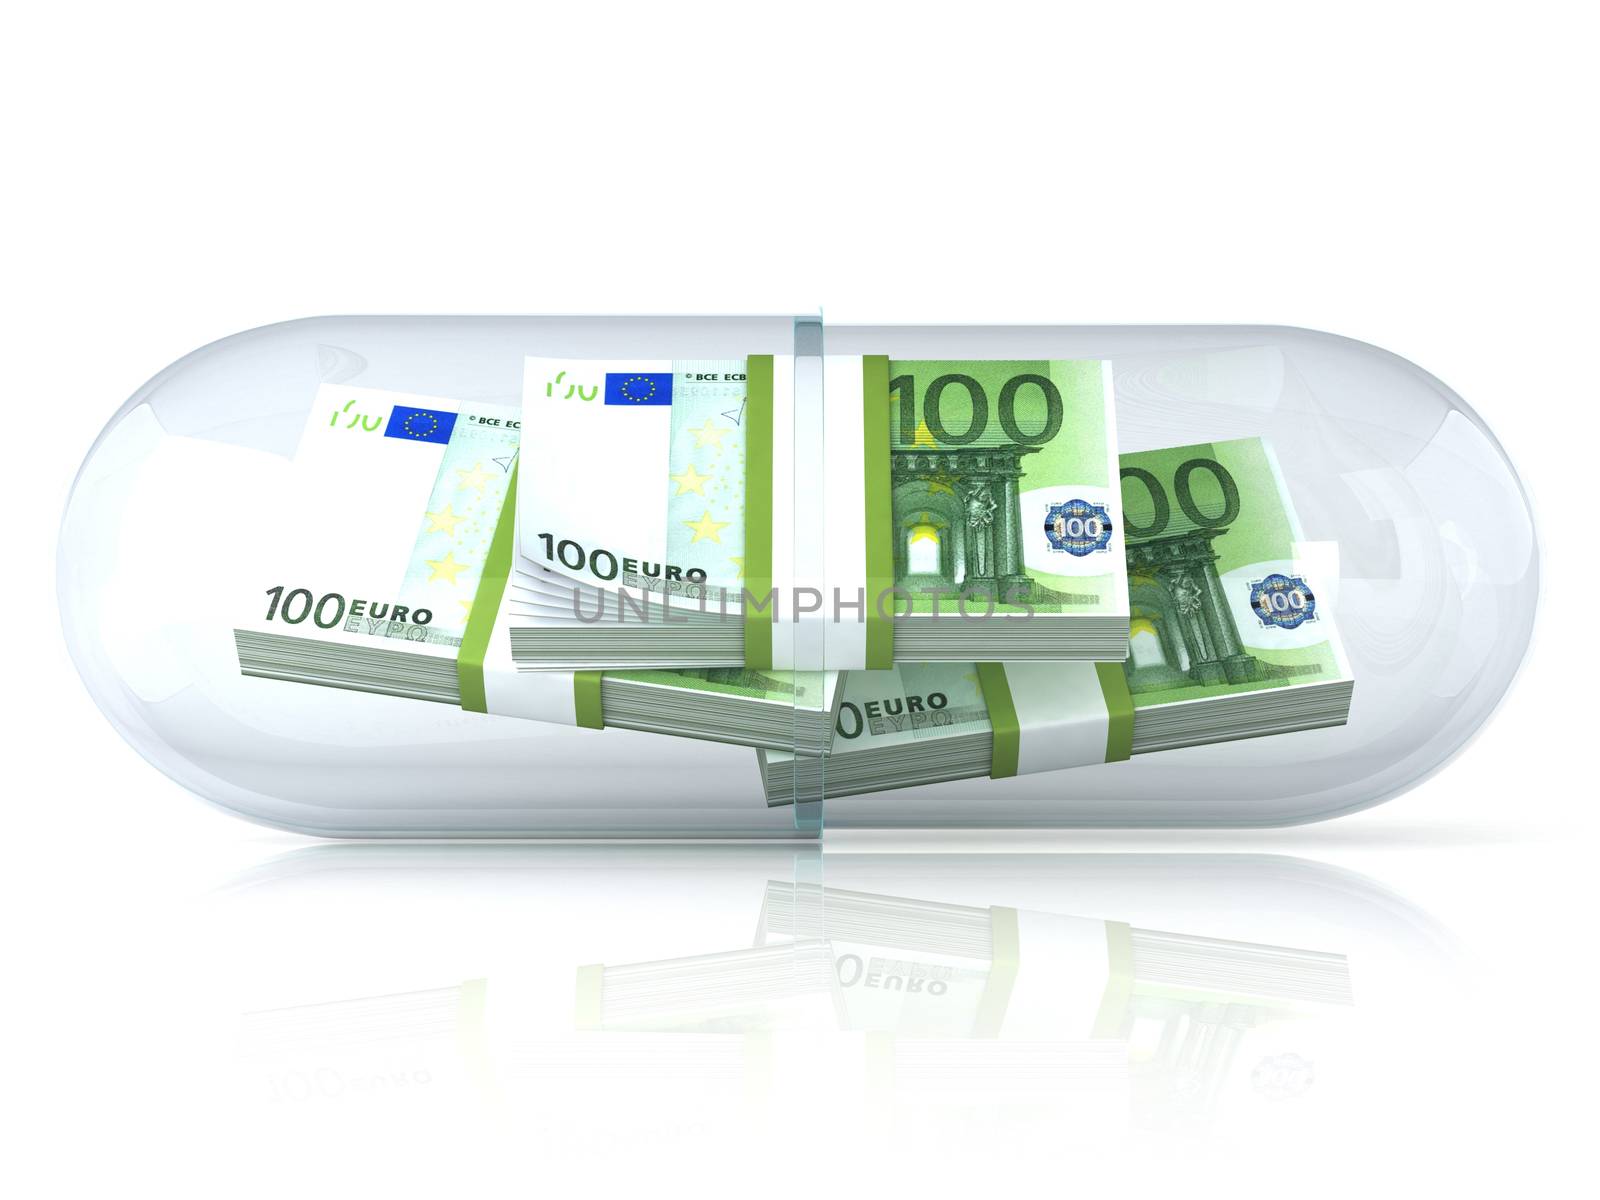 Transparent pill capsule, with euros stack inside. Isolated on w by djmilic